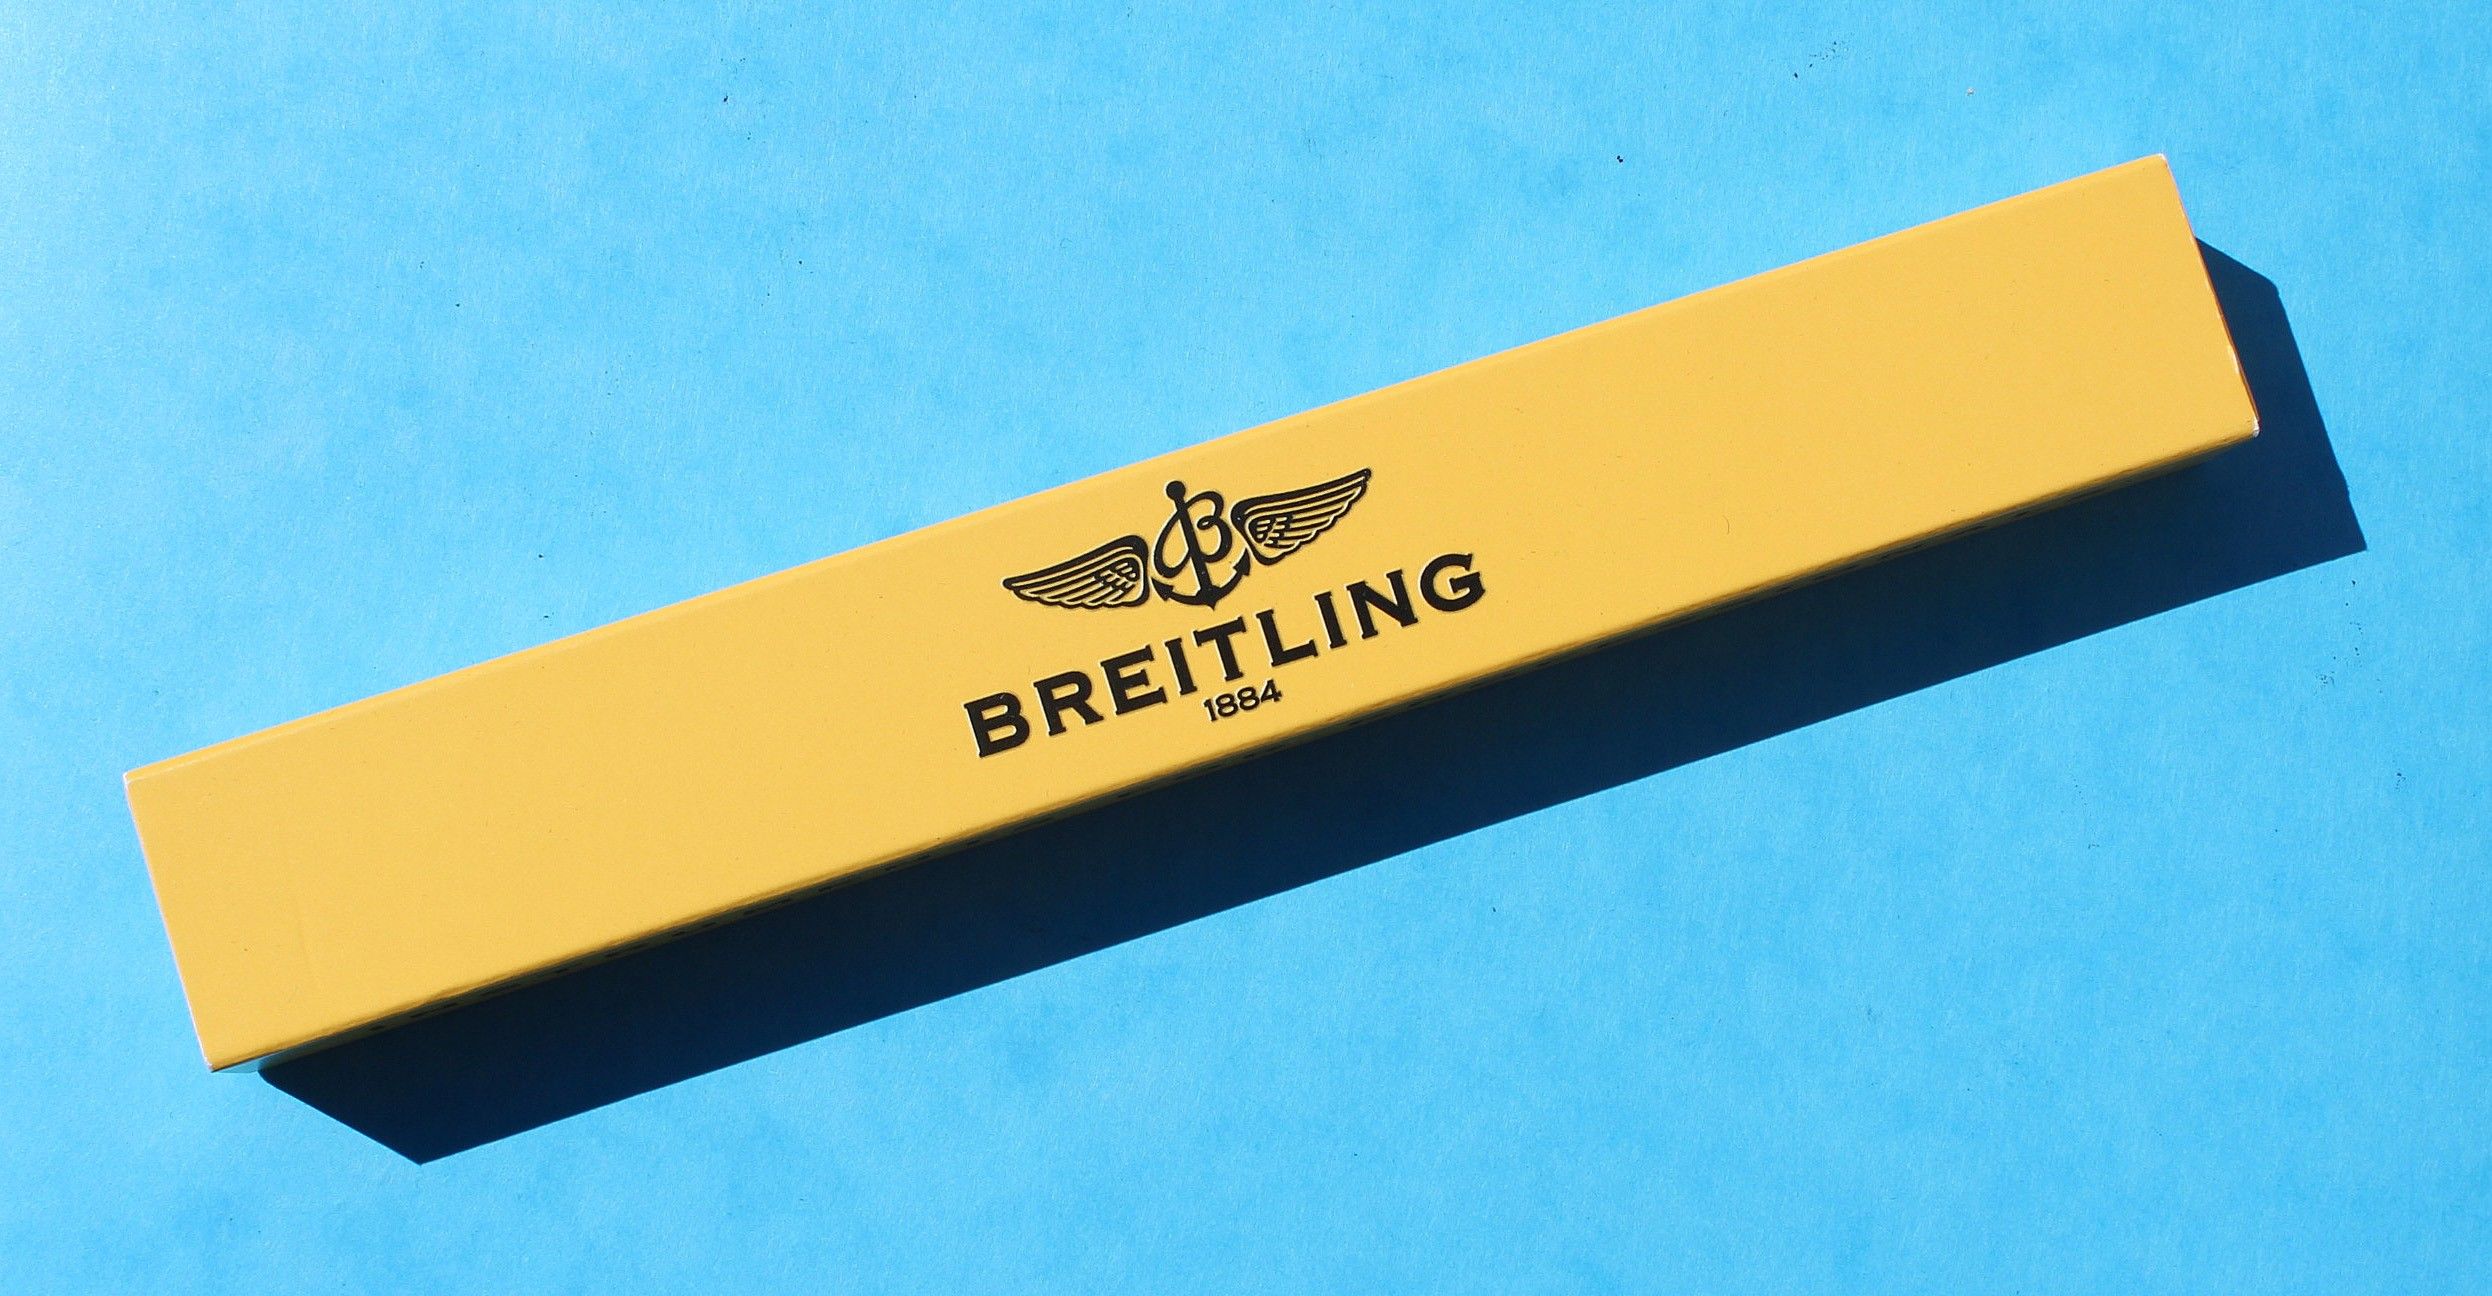 BREITLING OBLONG YELLOW STORAGE BOX WATCH DOCUMENTS, ACCESSORIES ...